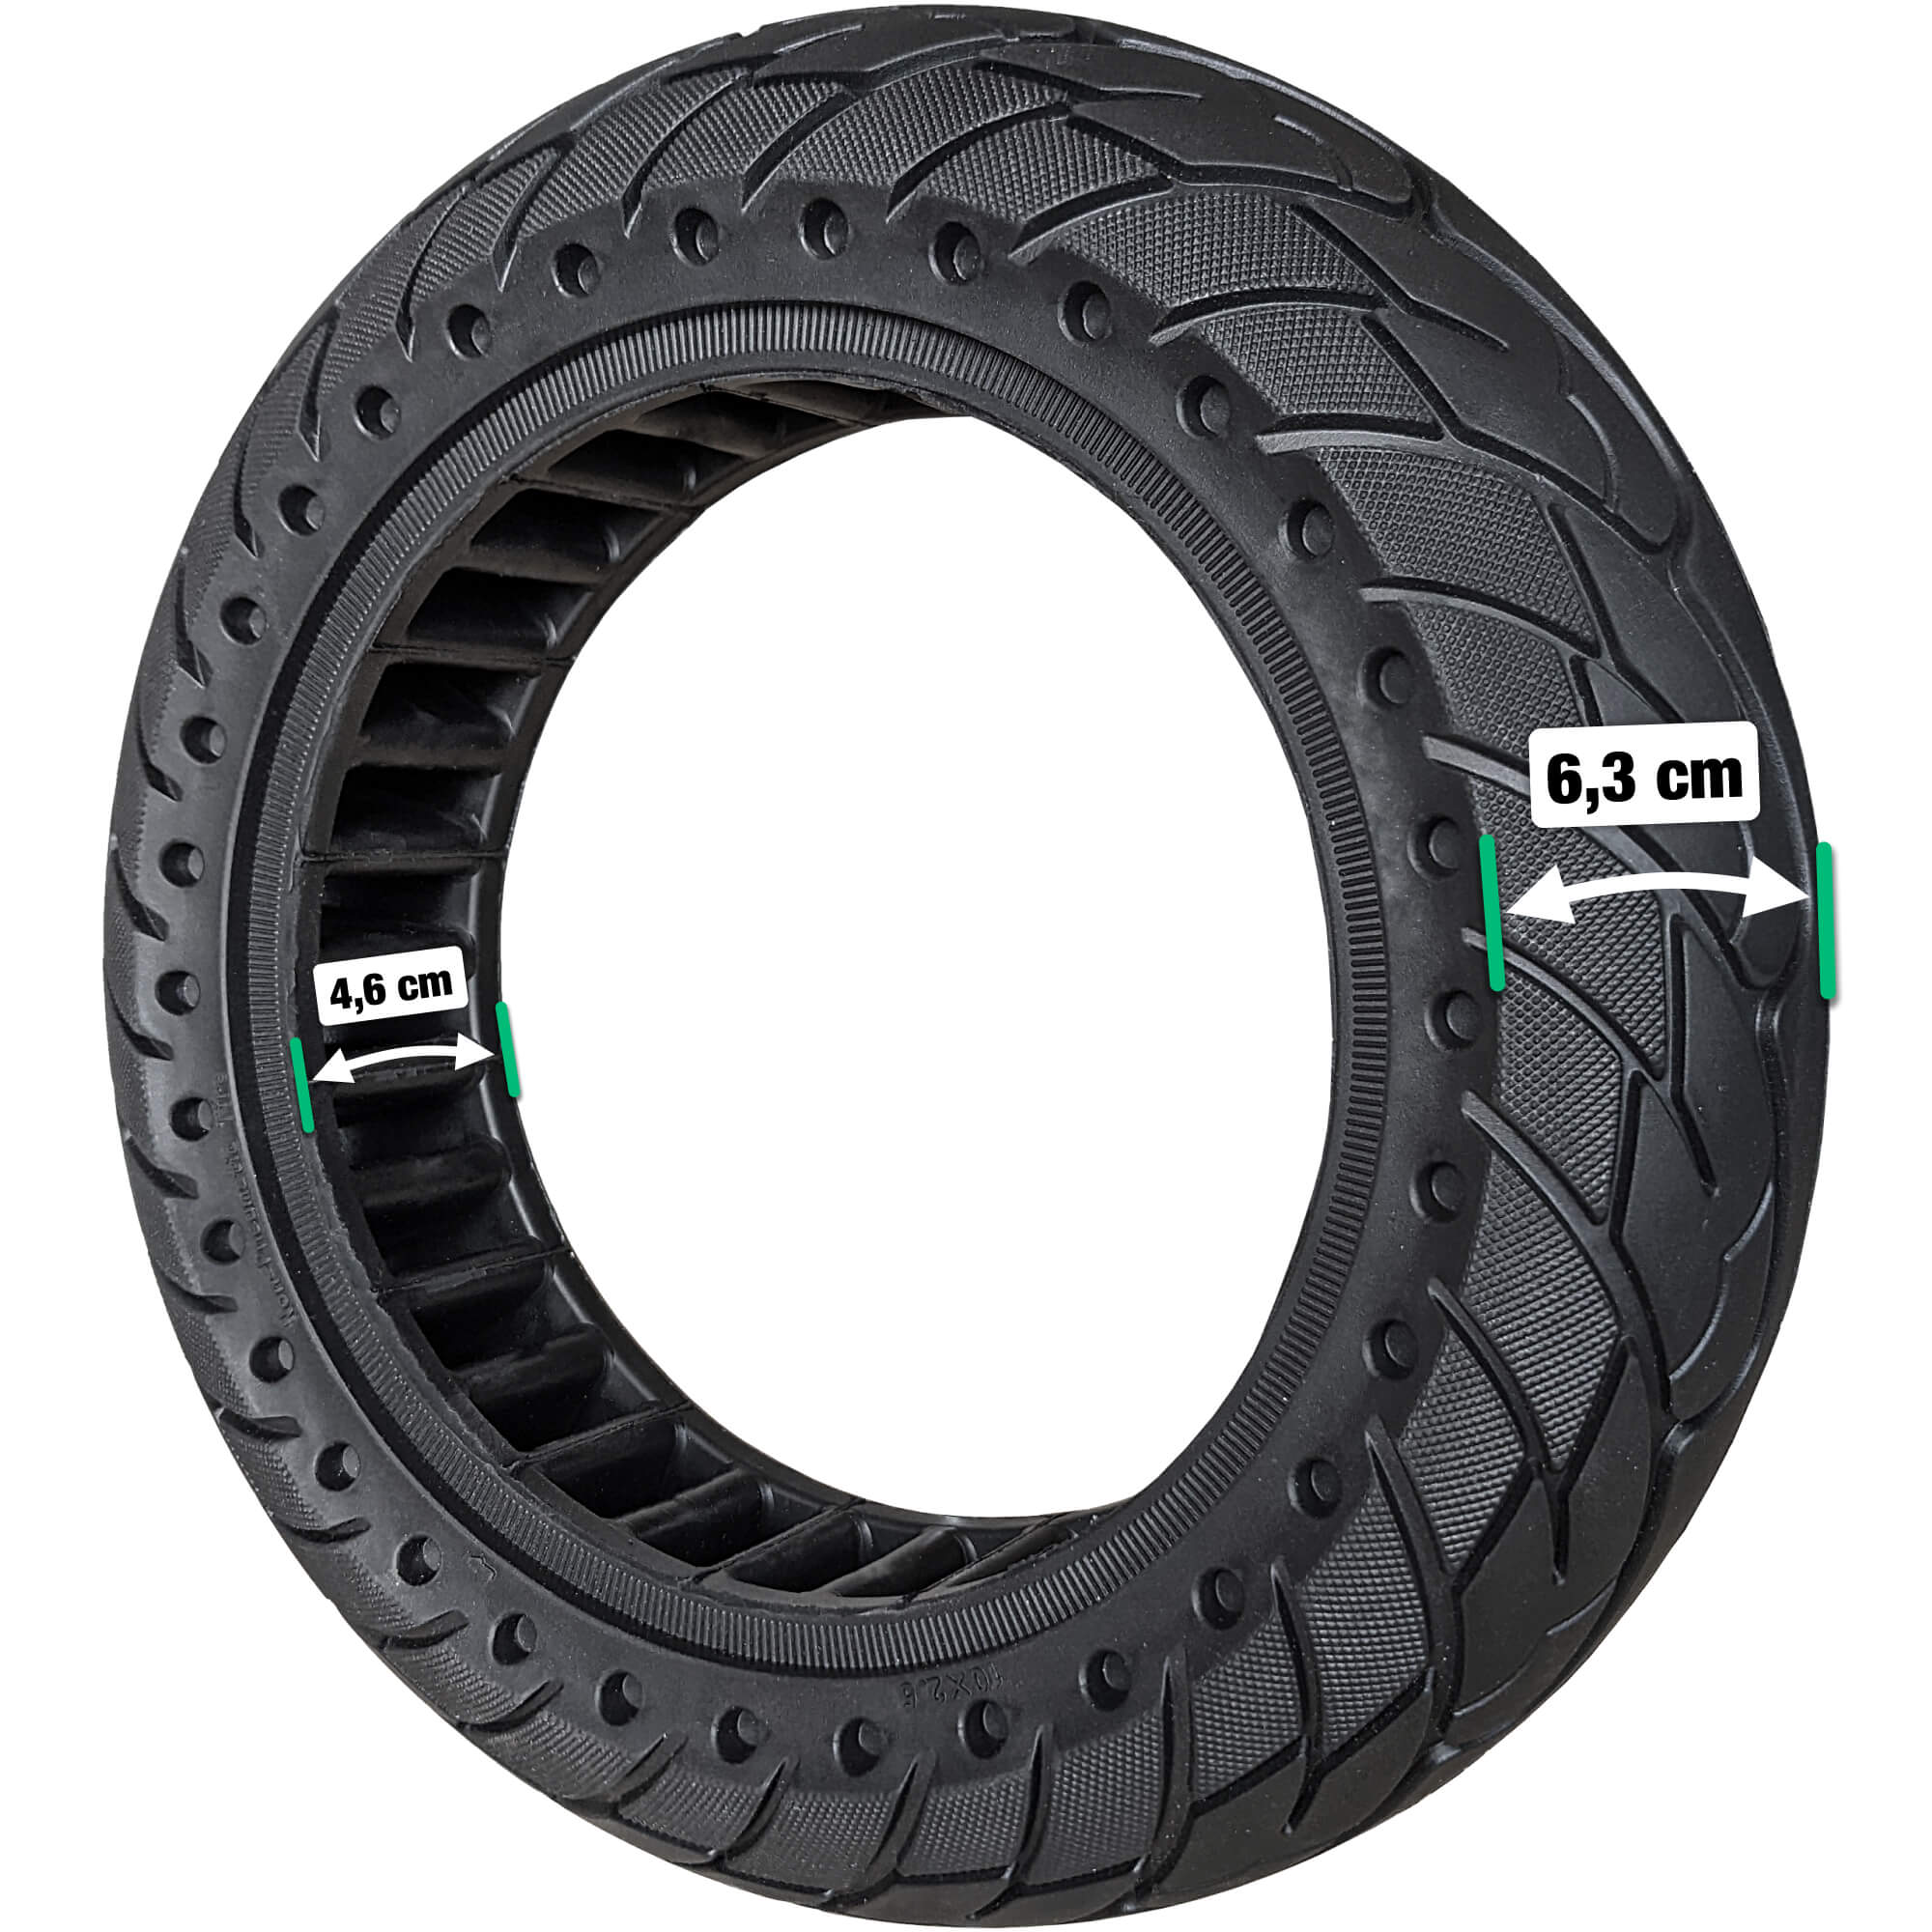 Ninebot G30 Max Solid Tire